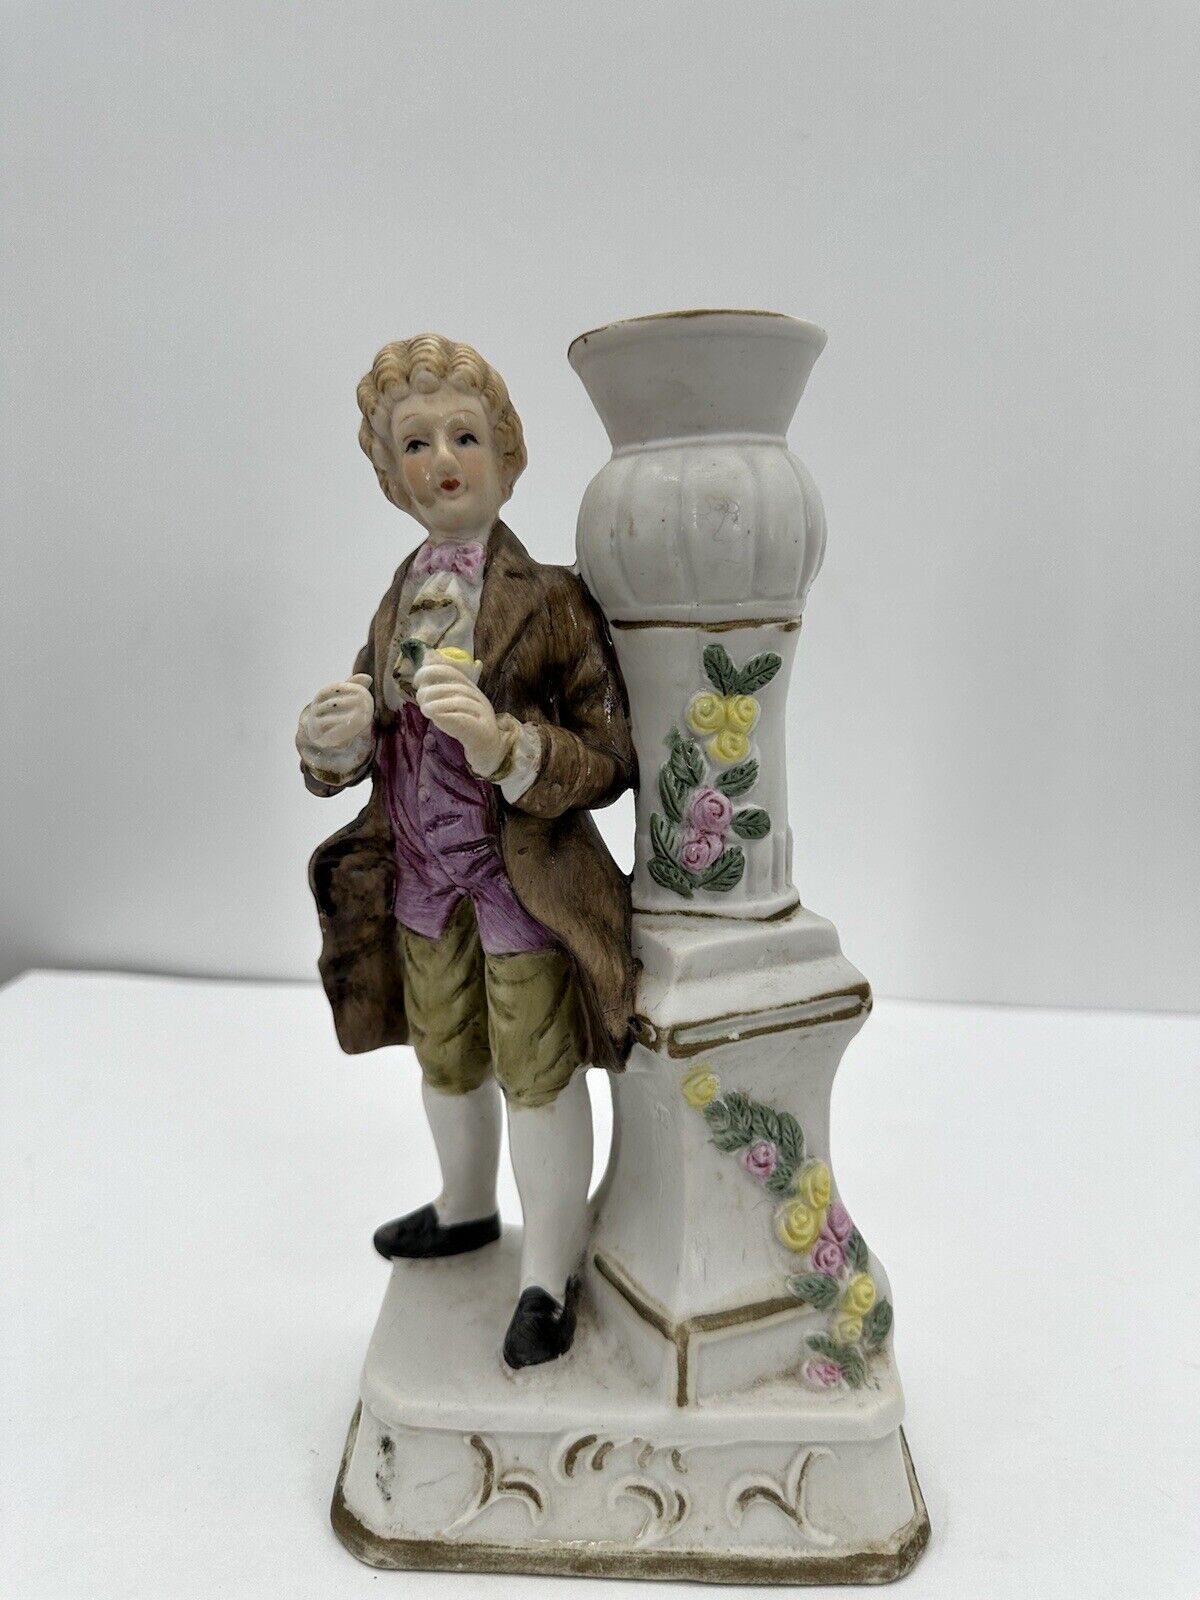 VTG LATE 20TH CENTURY Bisque Porcelain Colonial Man Candleholder 